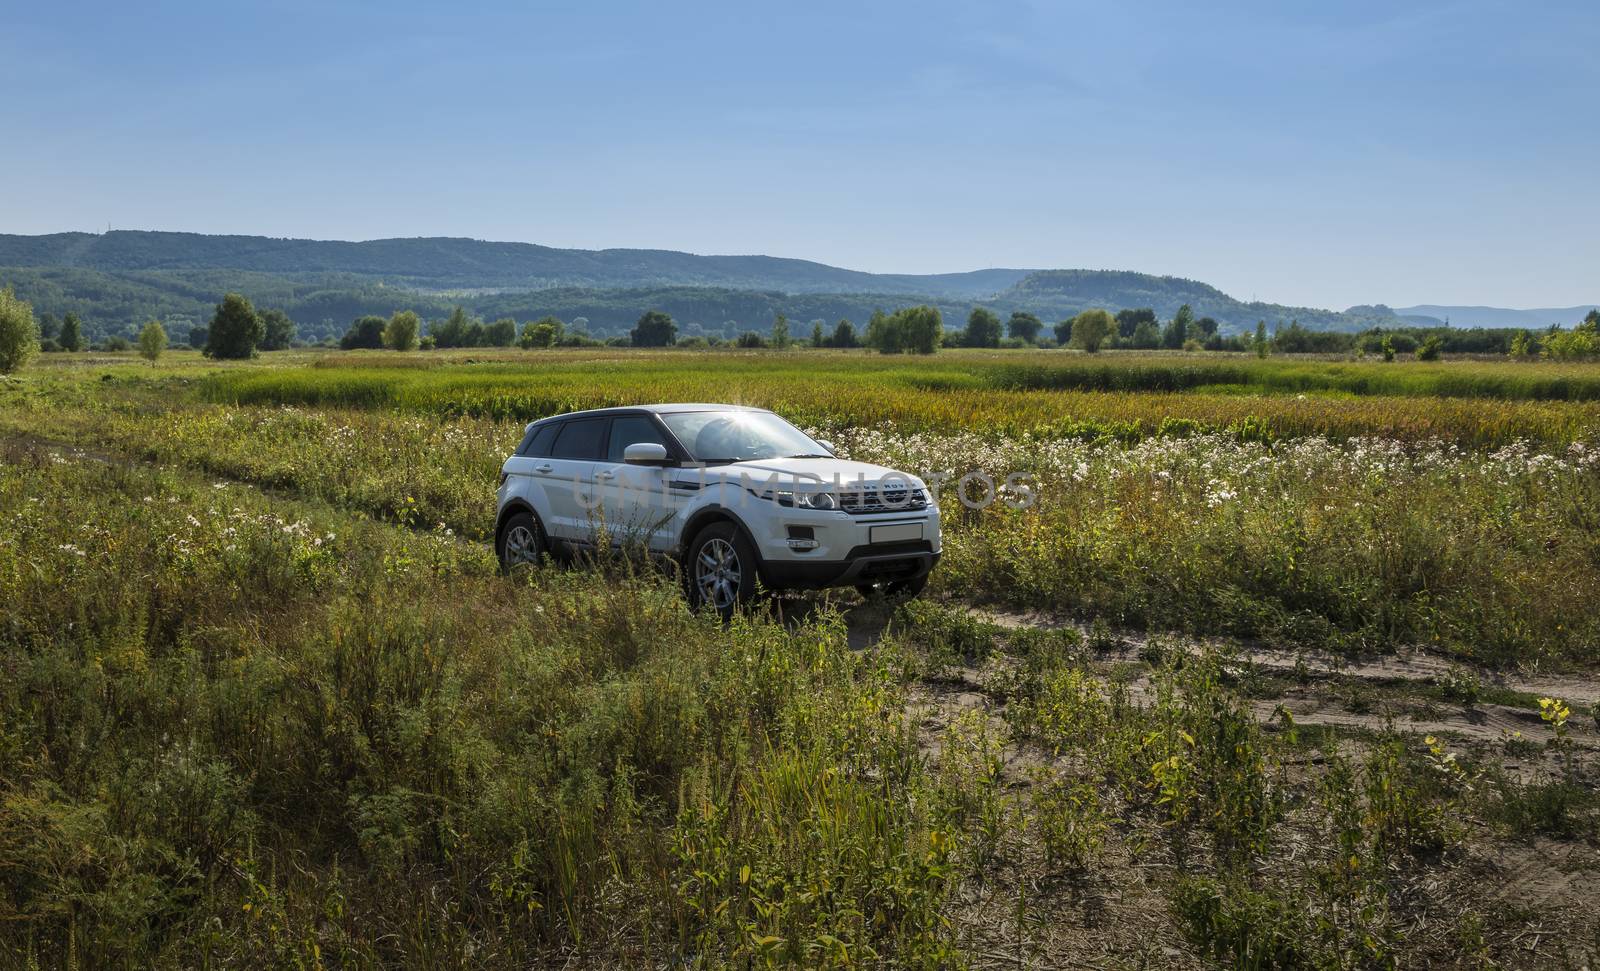 Car Land Rover Range Rover is in the field on a Sunny autumn day near the city of Samara, Russia. August 1, 2018 by butenkow